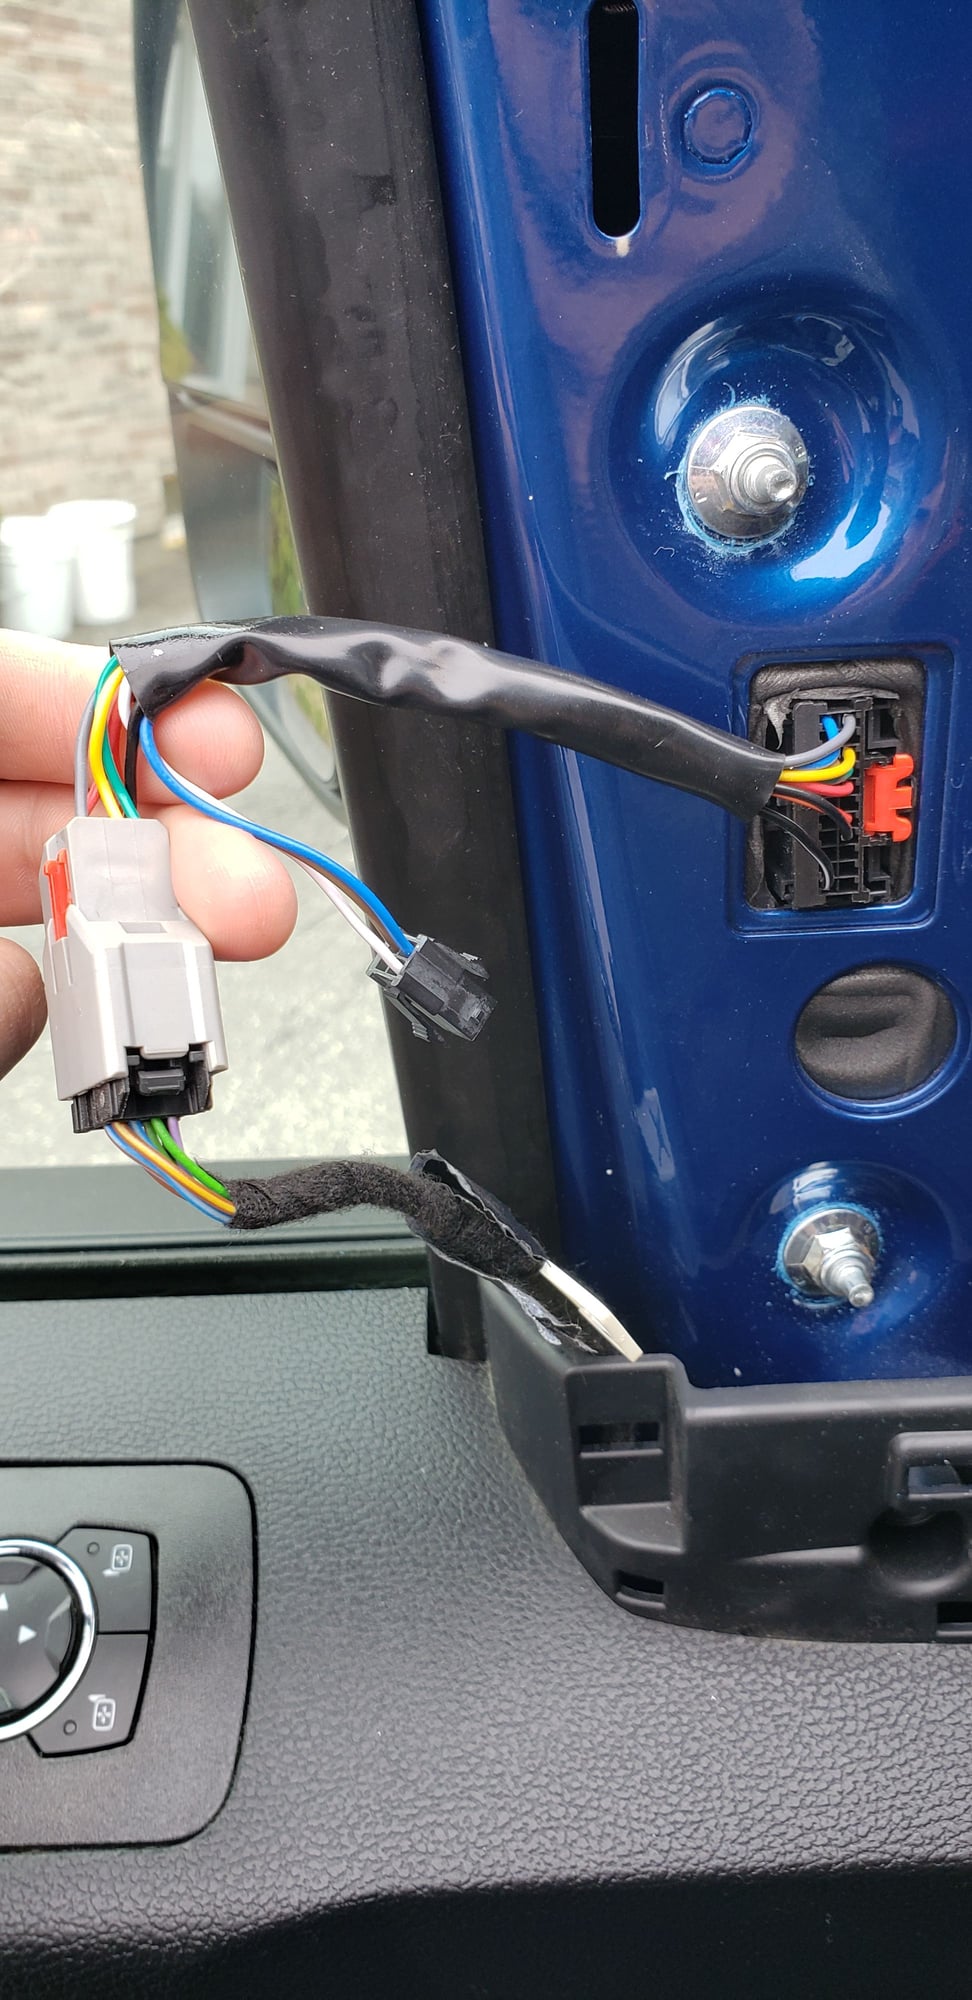 2017 Ford f150 towing mirror upgrade. Wiring questions - Ford F150